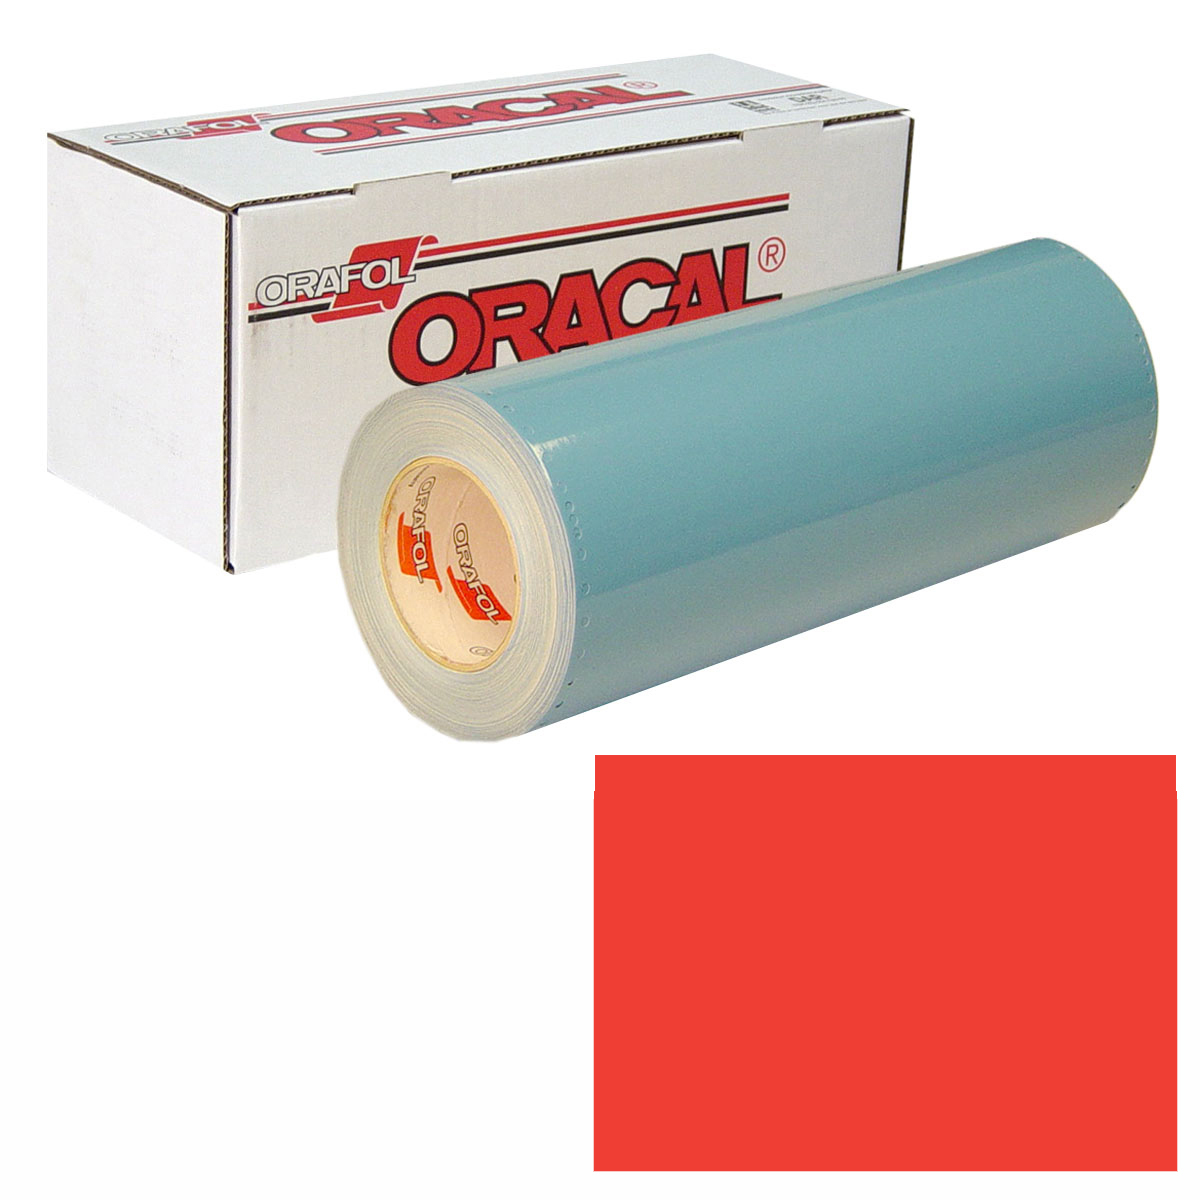 ORACAL 751 30in X 50yd 325 Middle Red